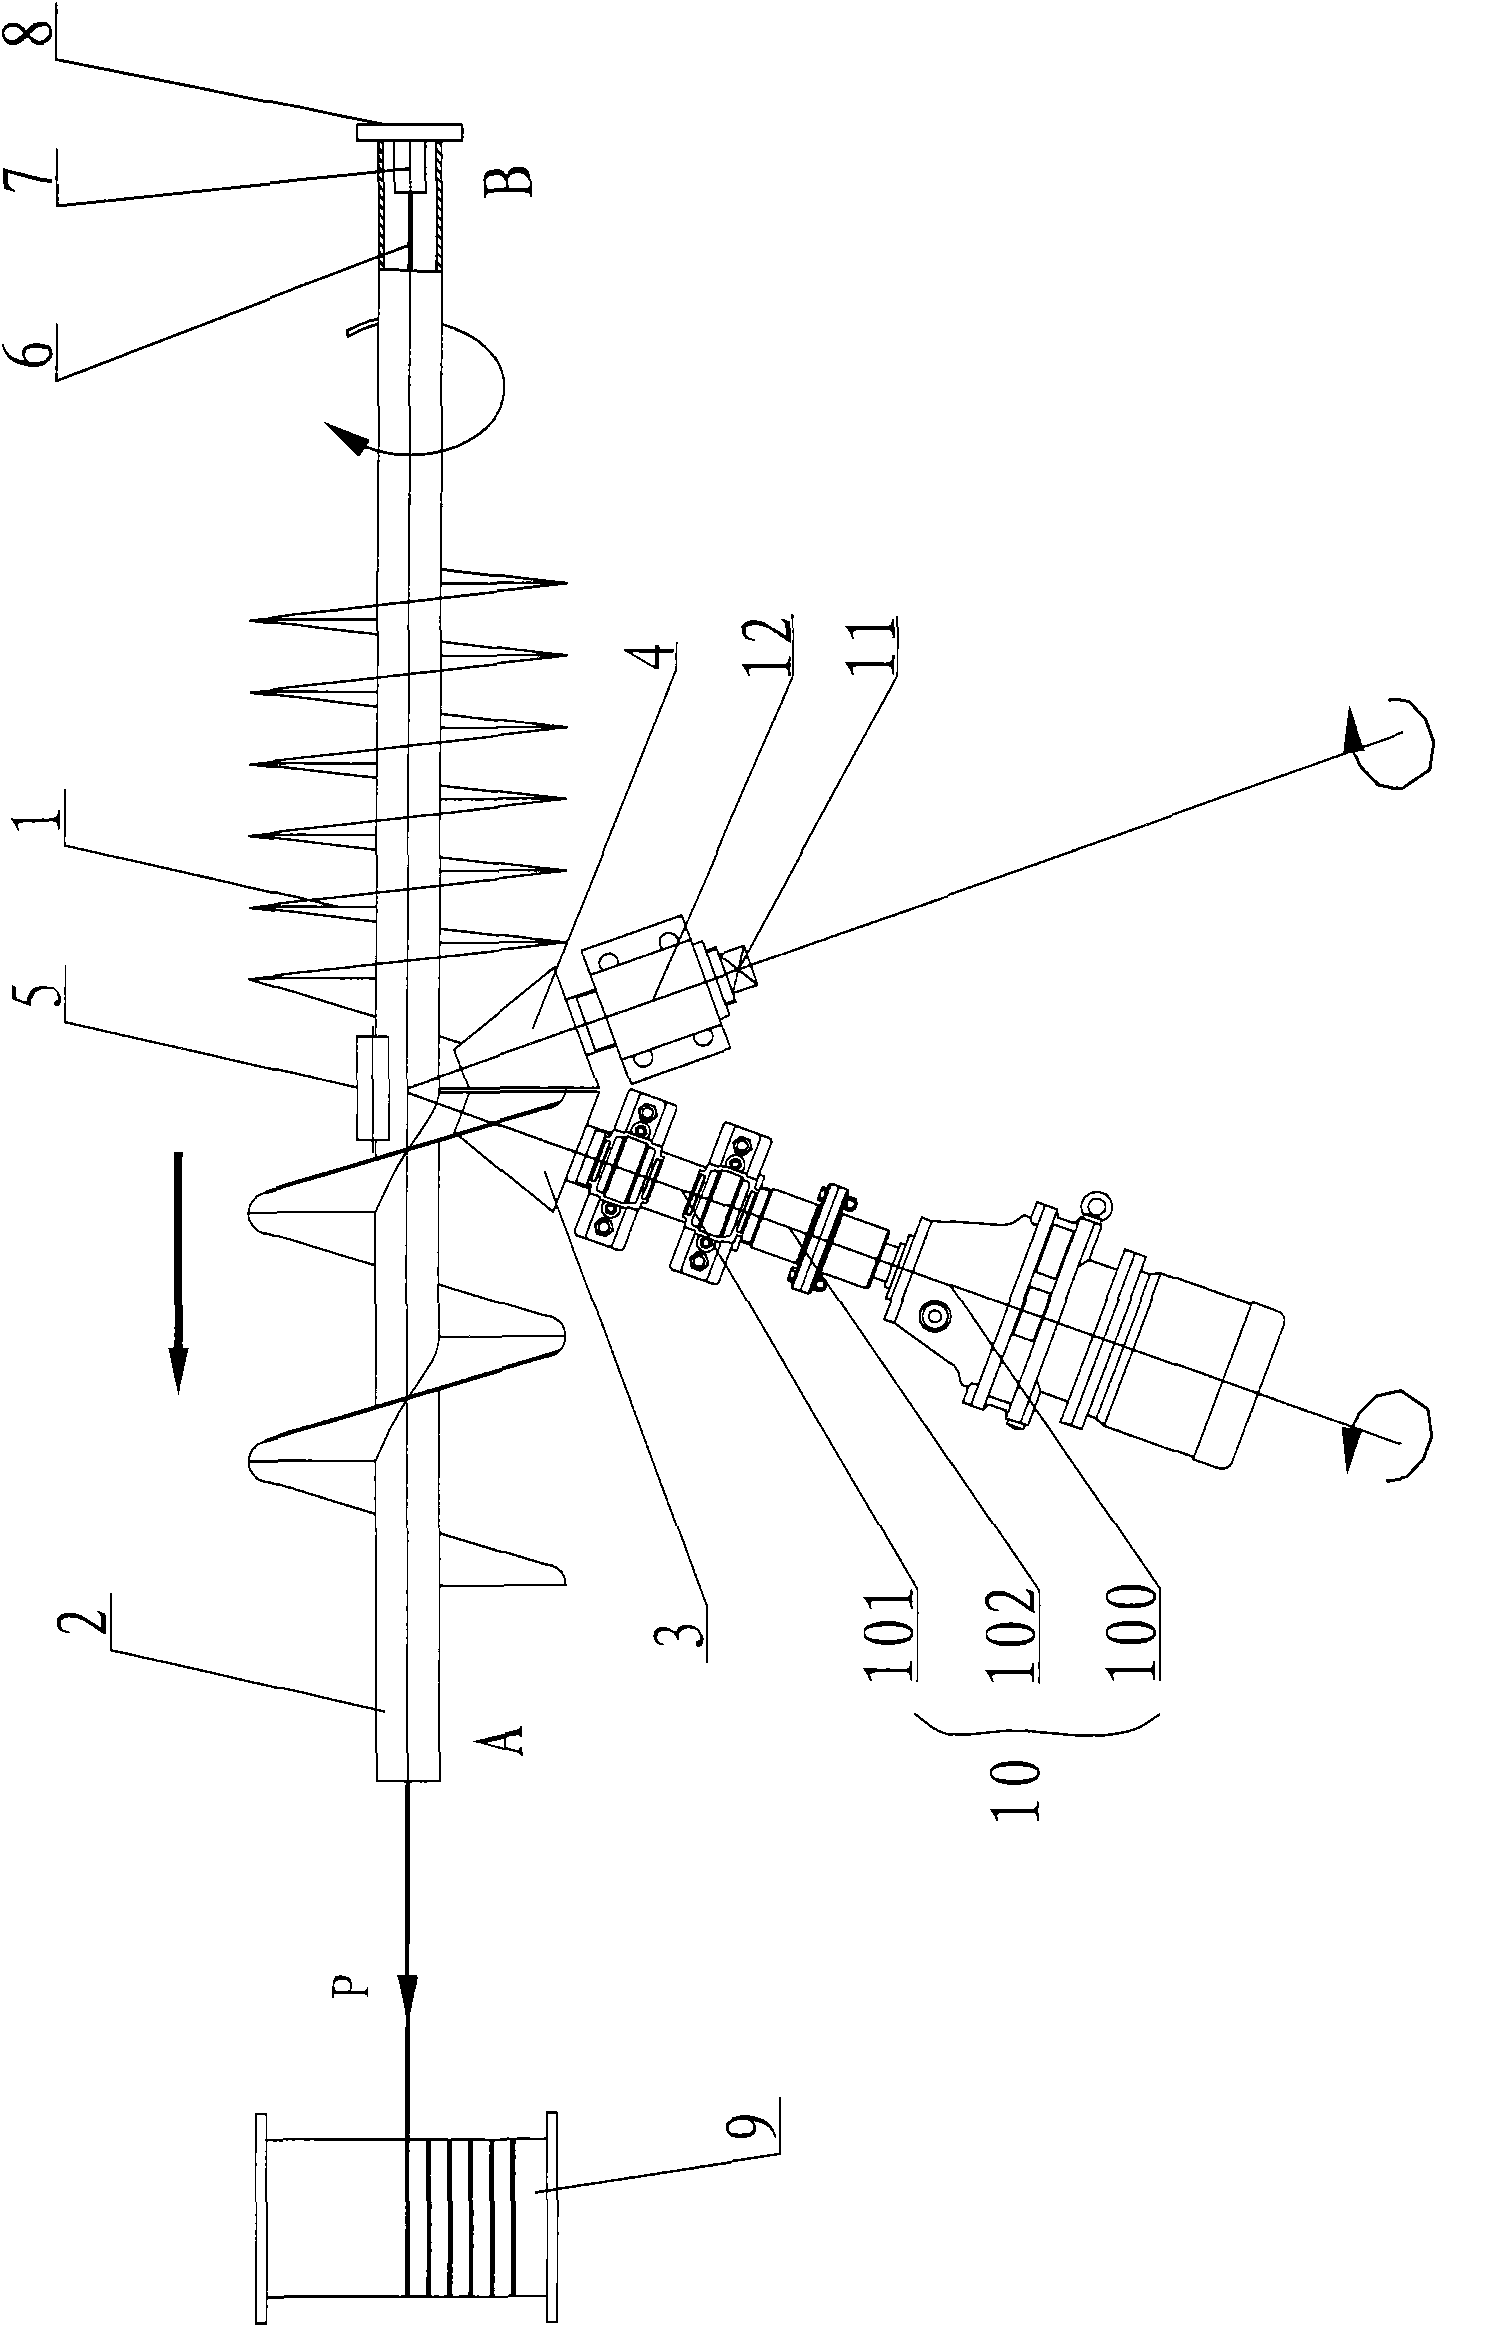 Method for manufacturing helical blade